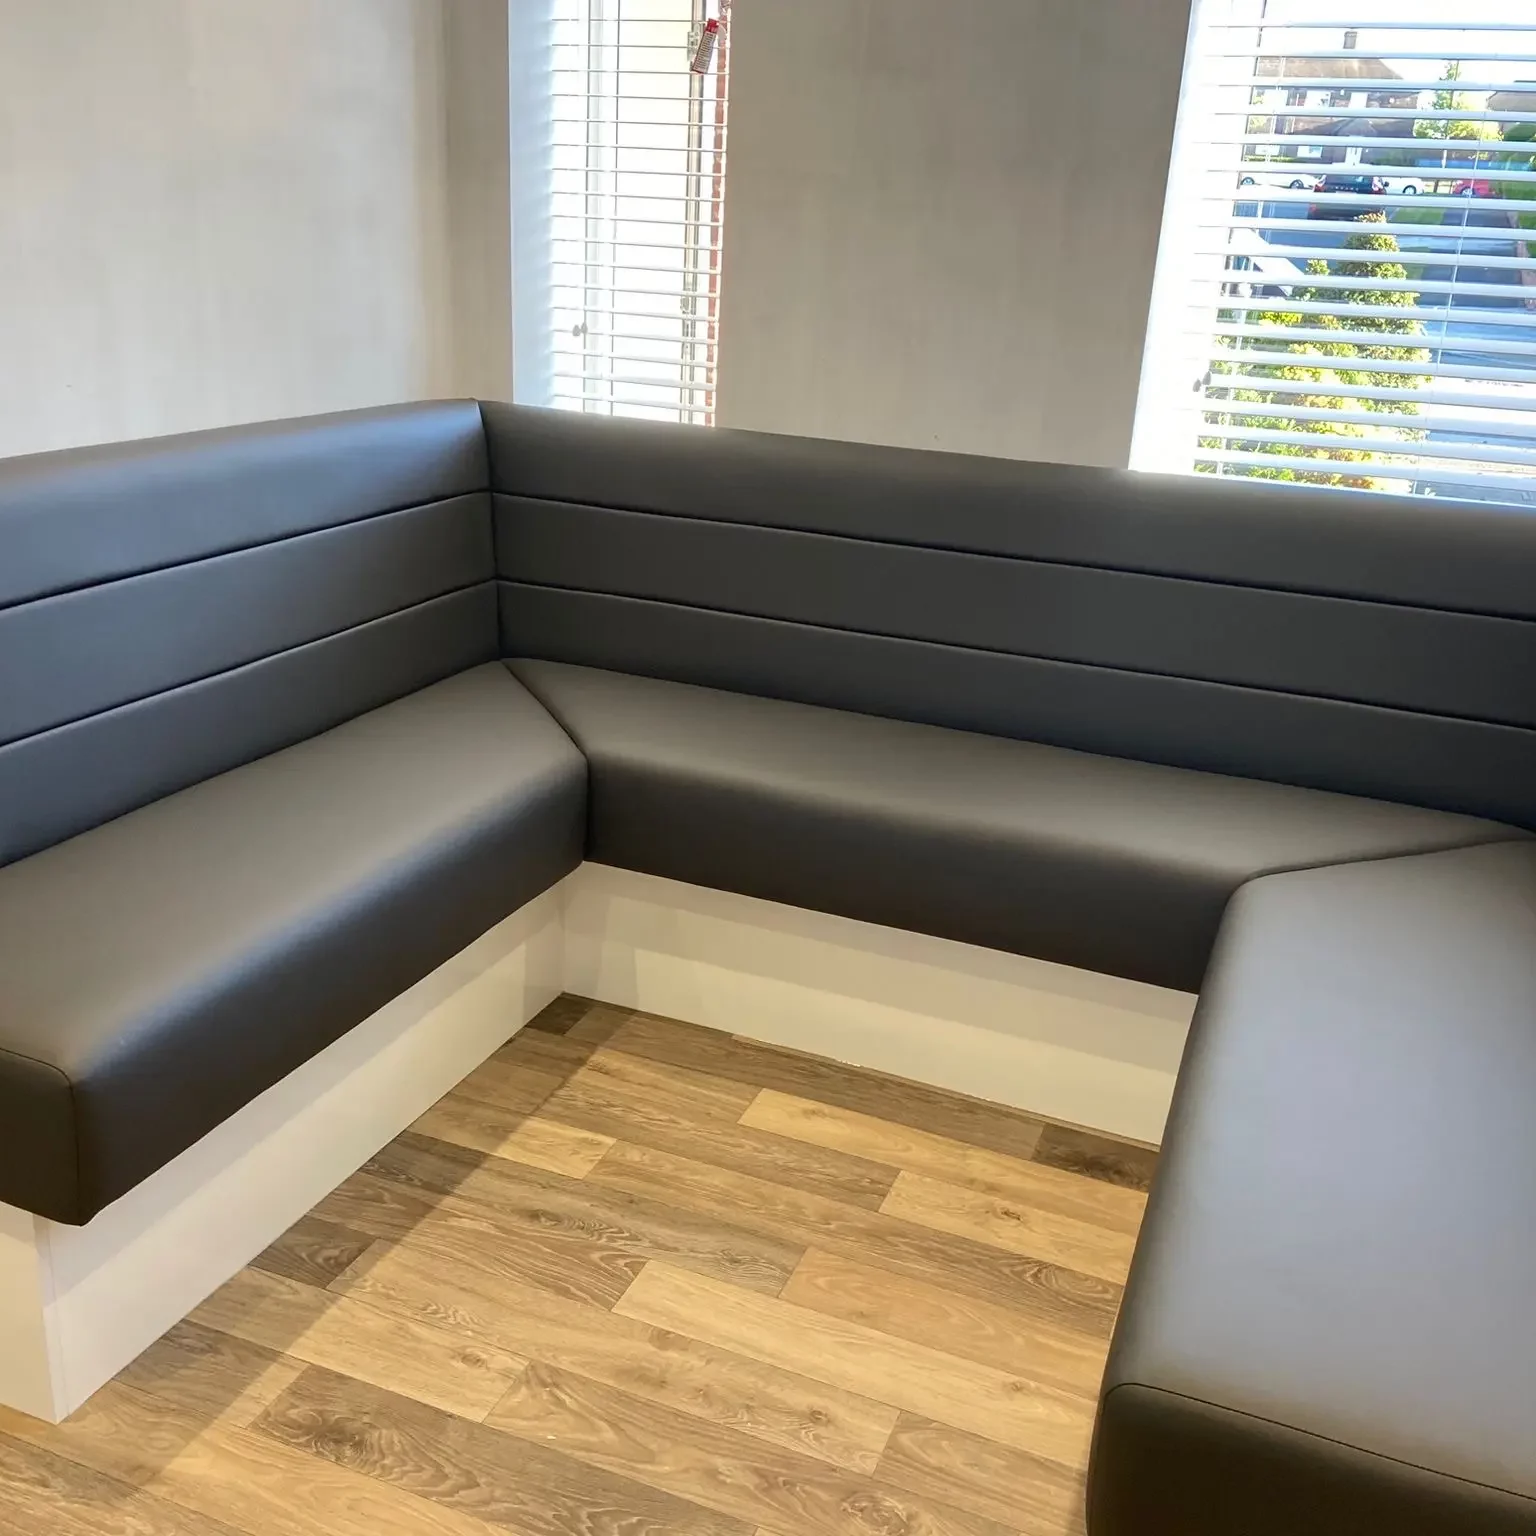 Square Booth Fitted Seating In Kitchen